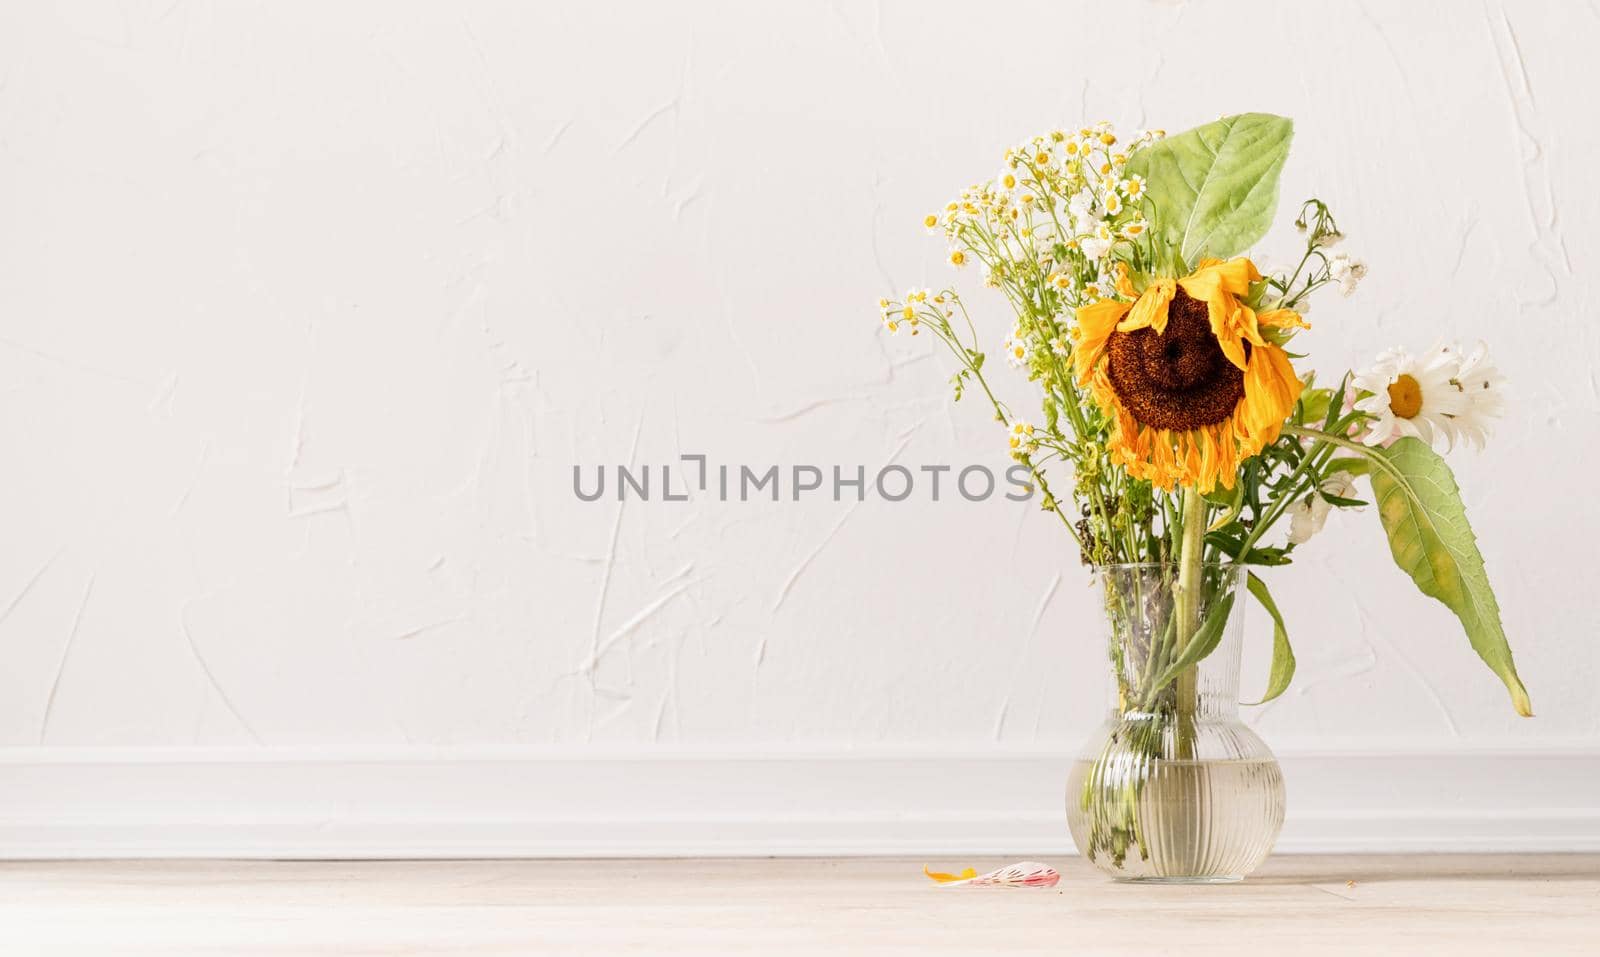 Autumn concept. A bouquet of withered flowers and a sunflower in a vase